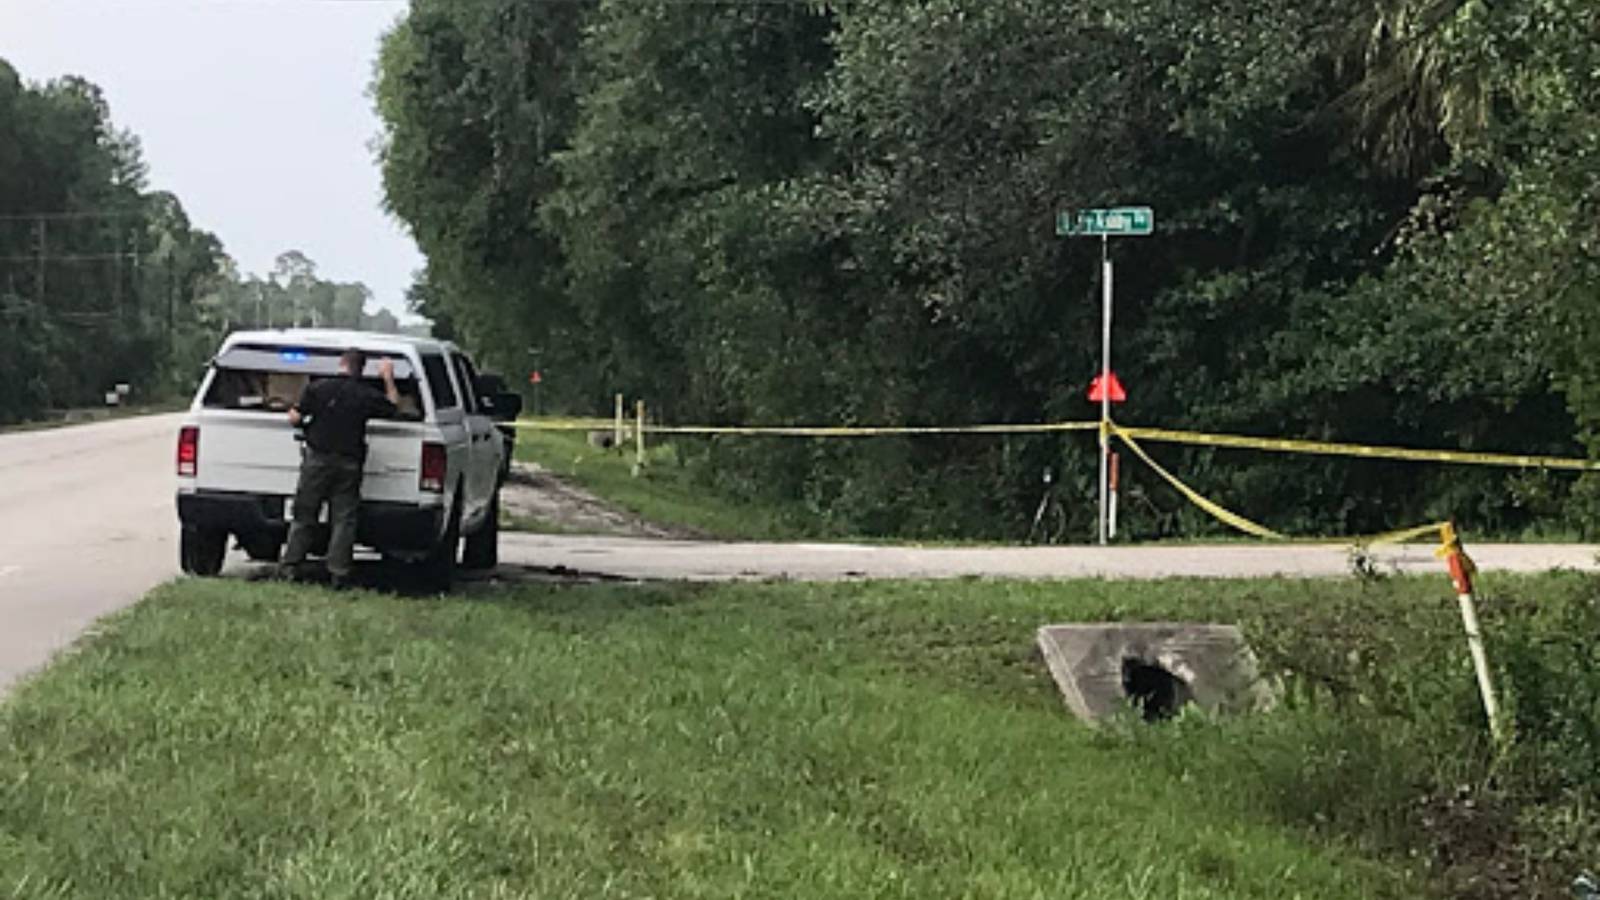 Death investigation underway after body found along road in Volusia